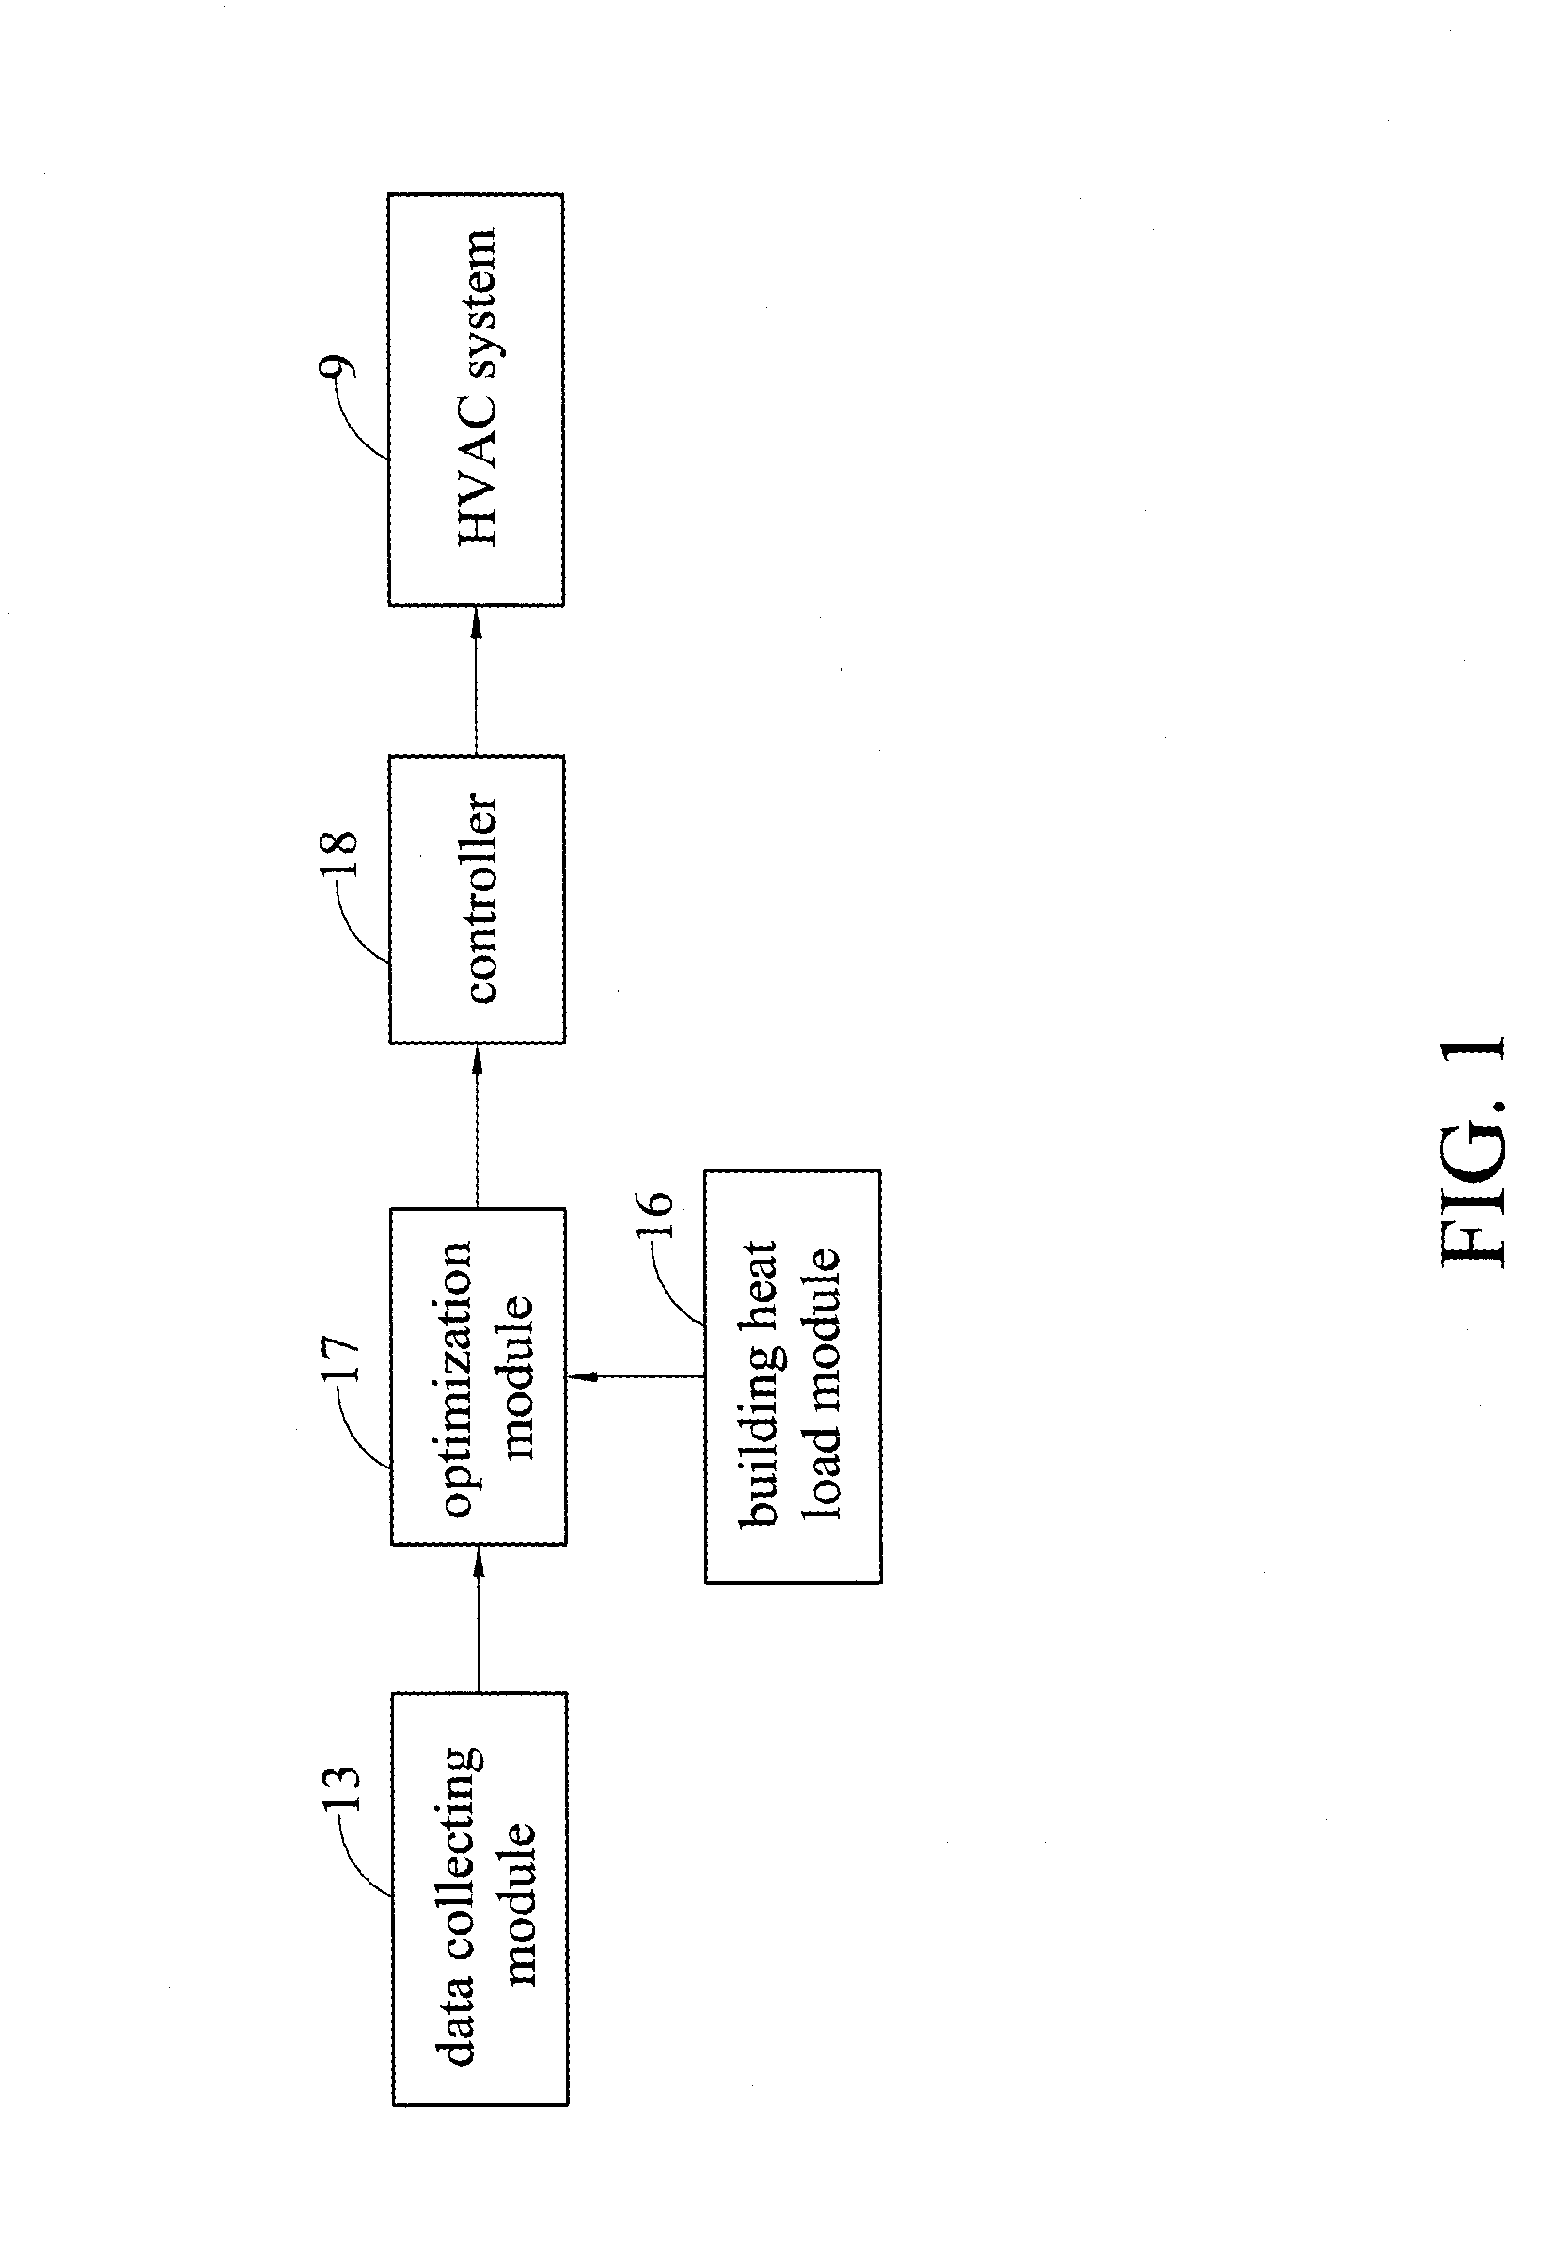 Controlling device and method for HVAC system